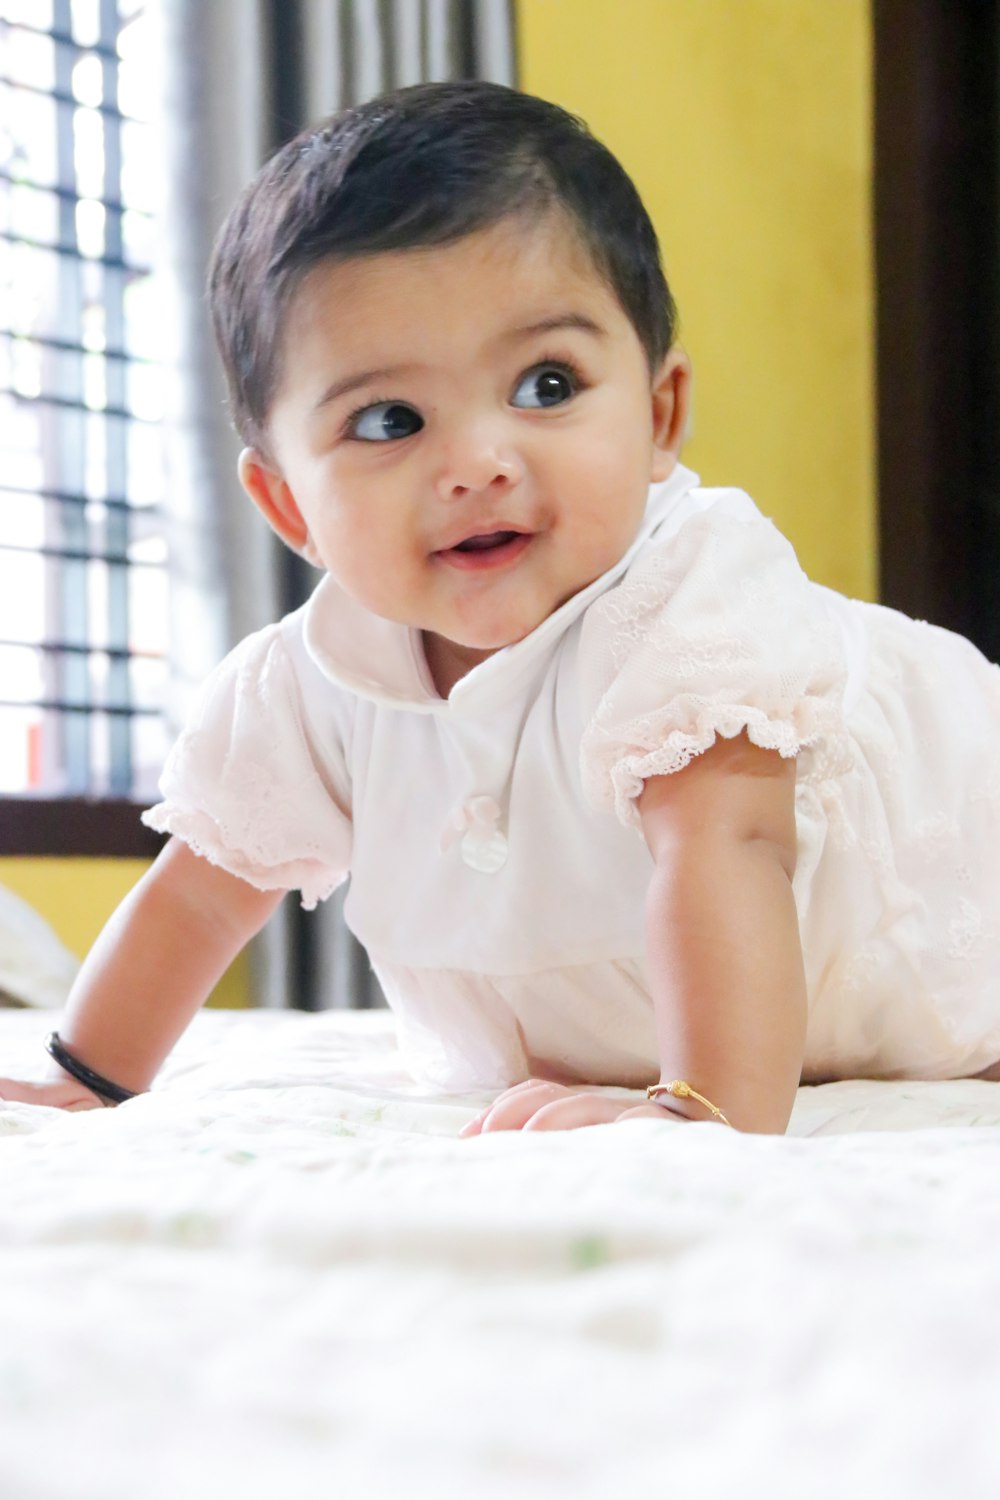 Full 4K Collection of Over 999 Amazingly Cute Baby Girl Images